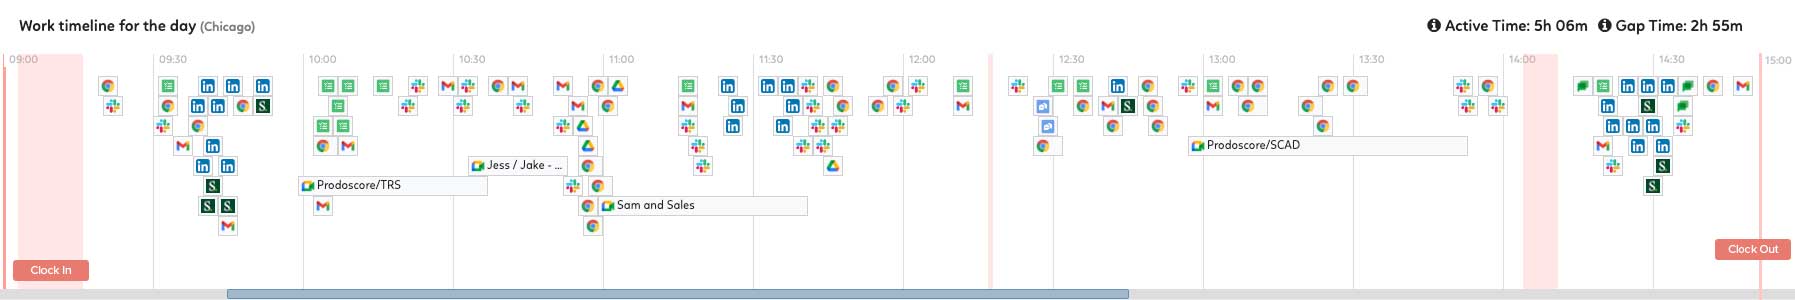 ADP - Prodoscore Timeline - Clock in & Clock out View